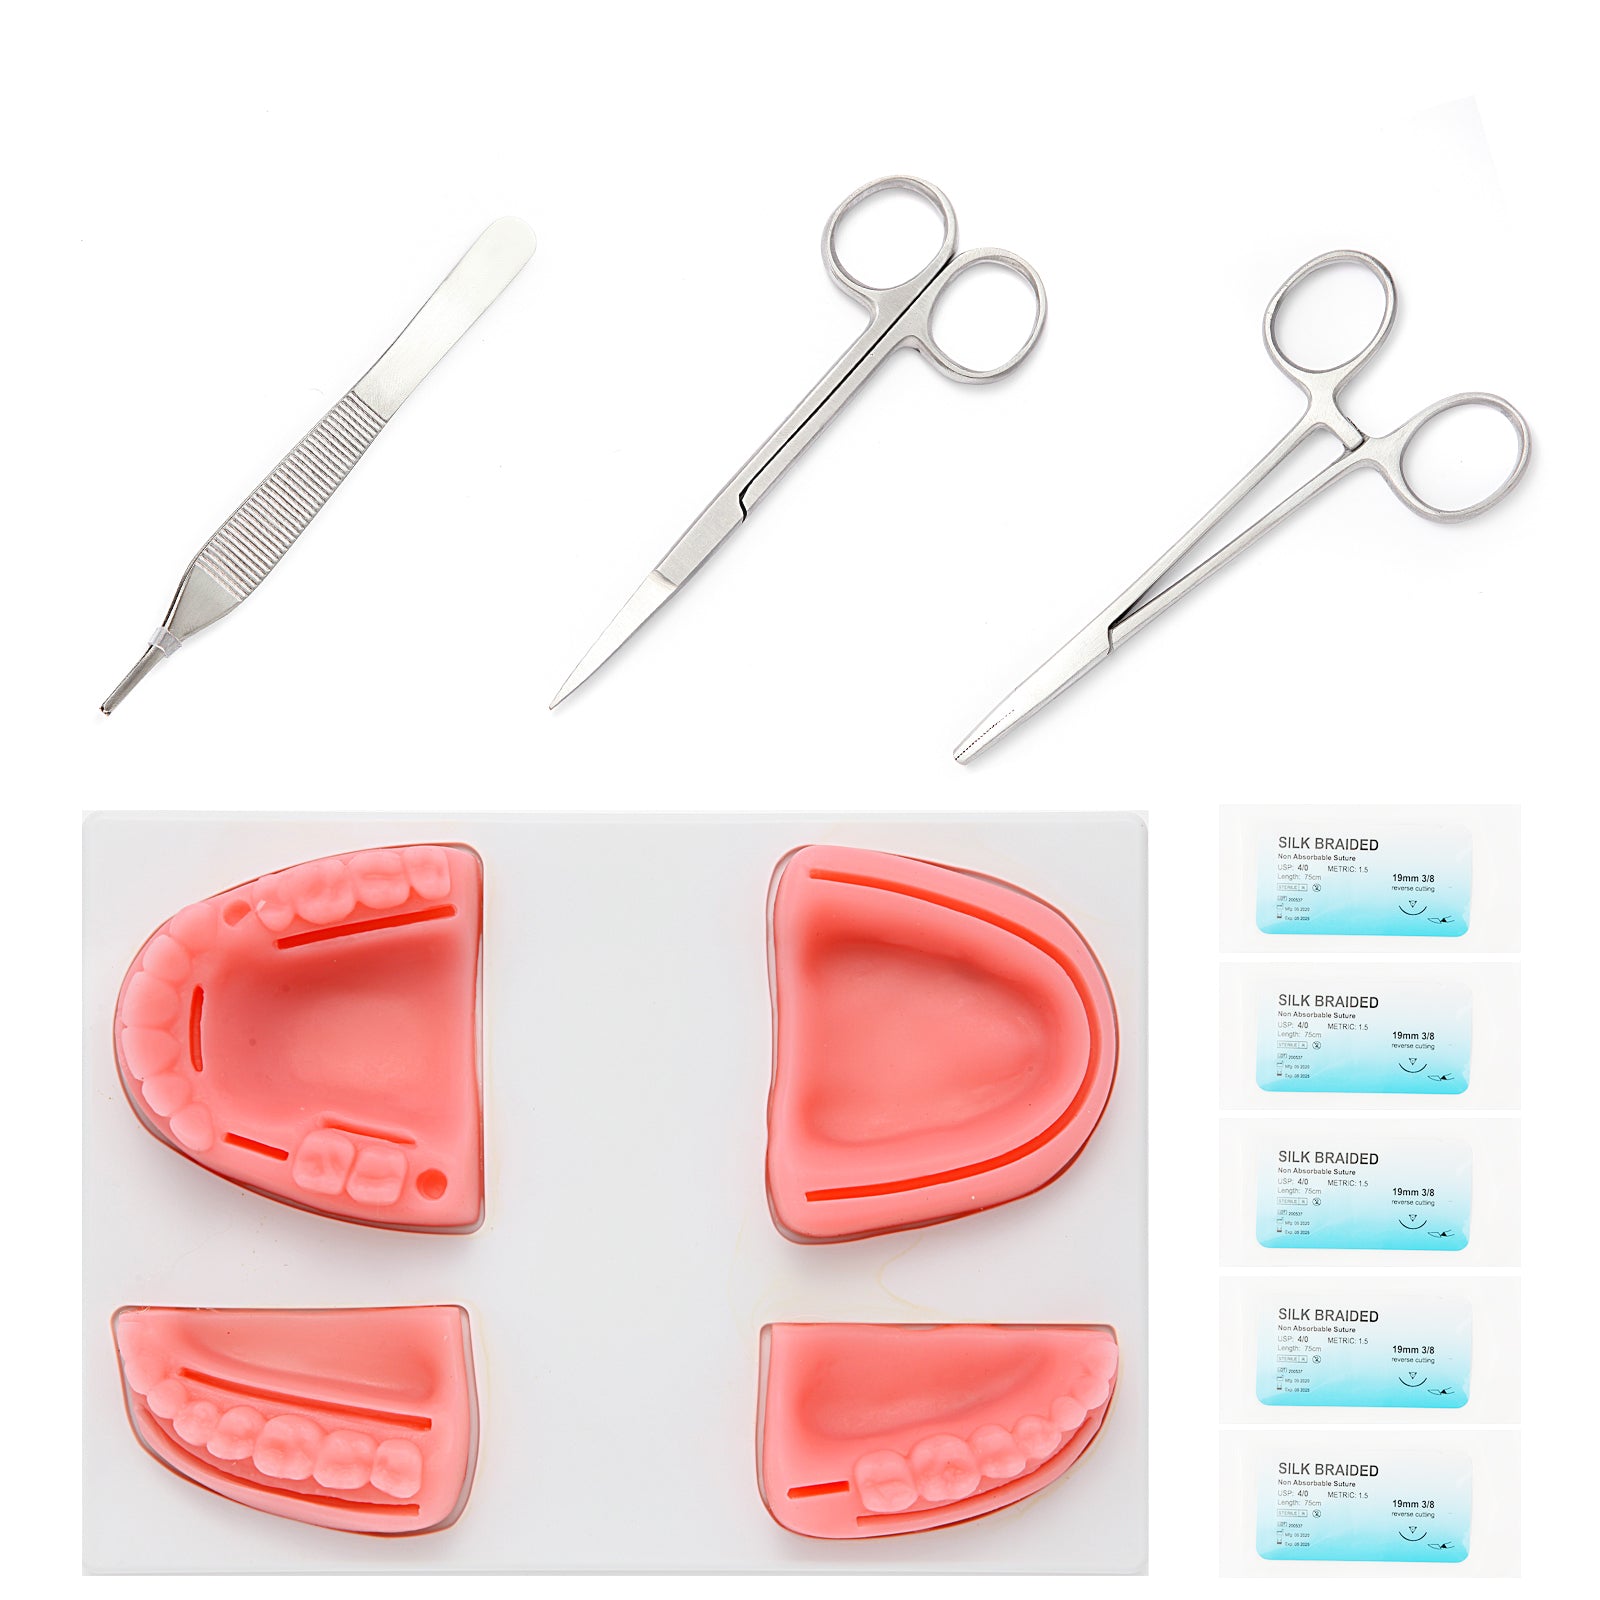 Medarchitect Suture Practice Complete Kit (30 Pieces) for Medical Student  Suture Training Include Upgrade Suture Pad with 14 Pre-Cut Wounds Suture  Tools Suture Thread & Needle